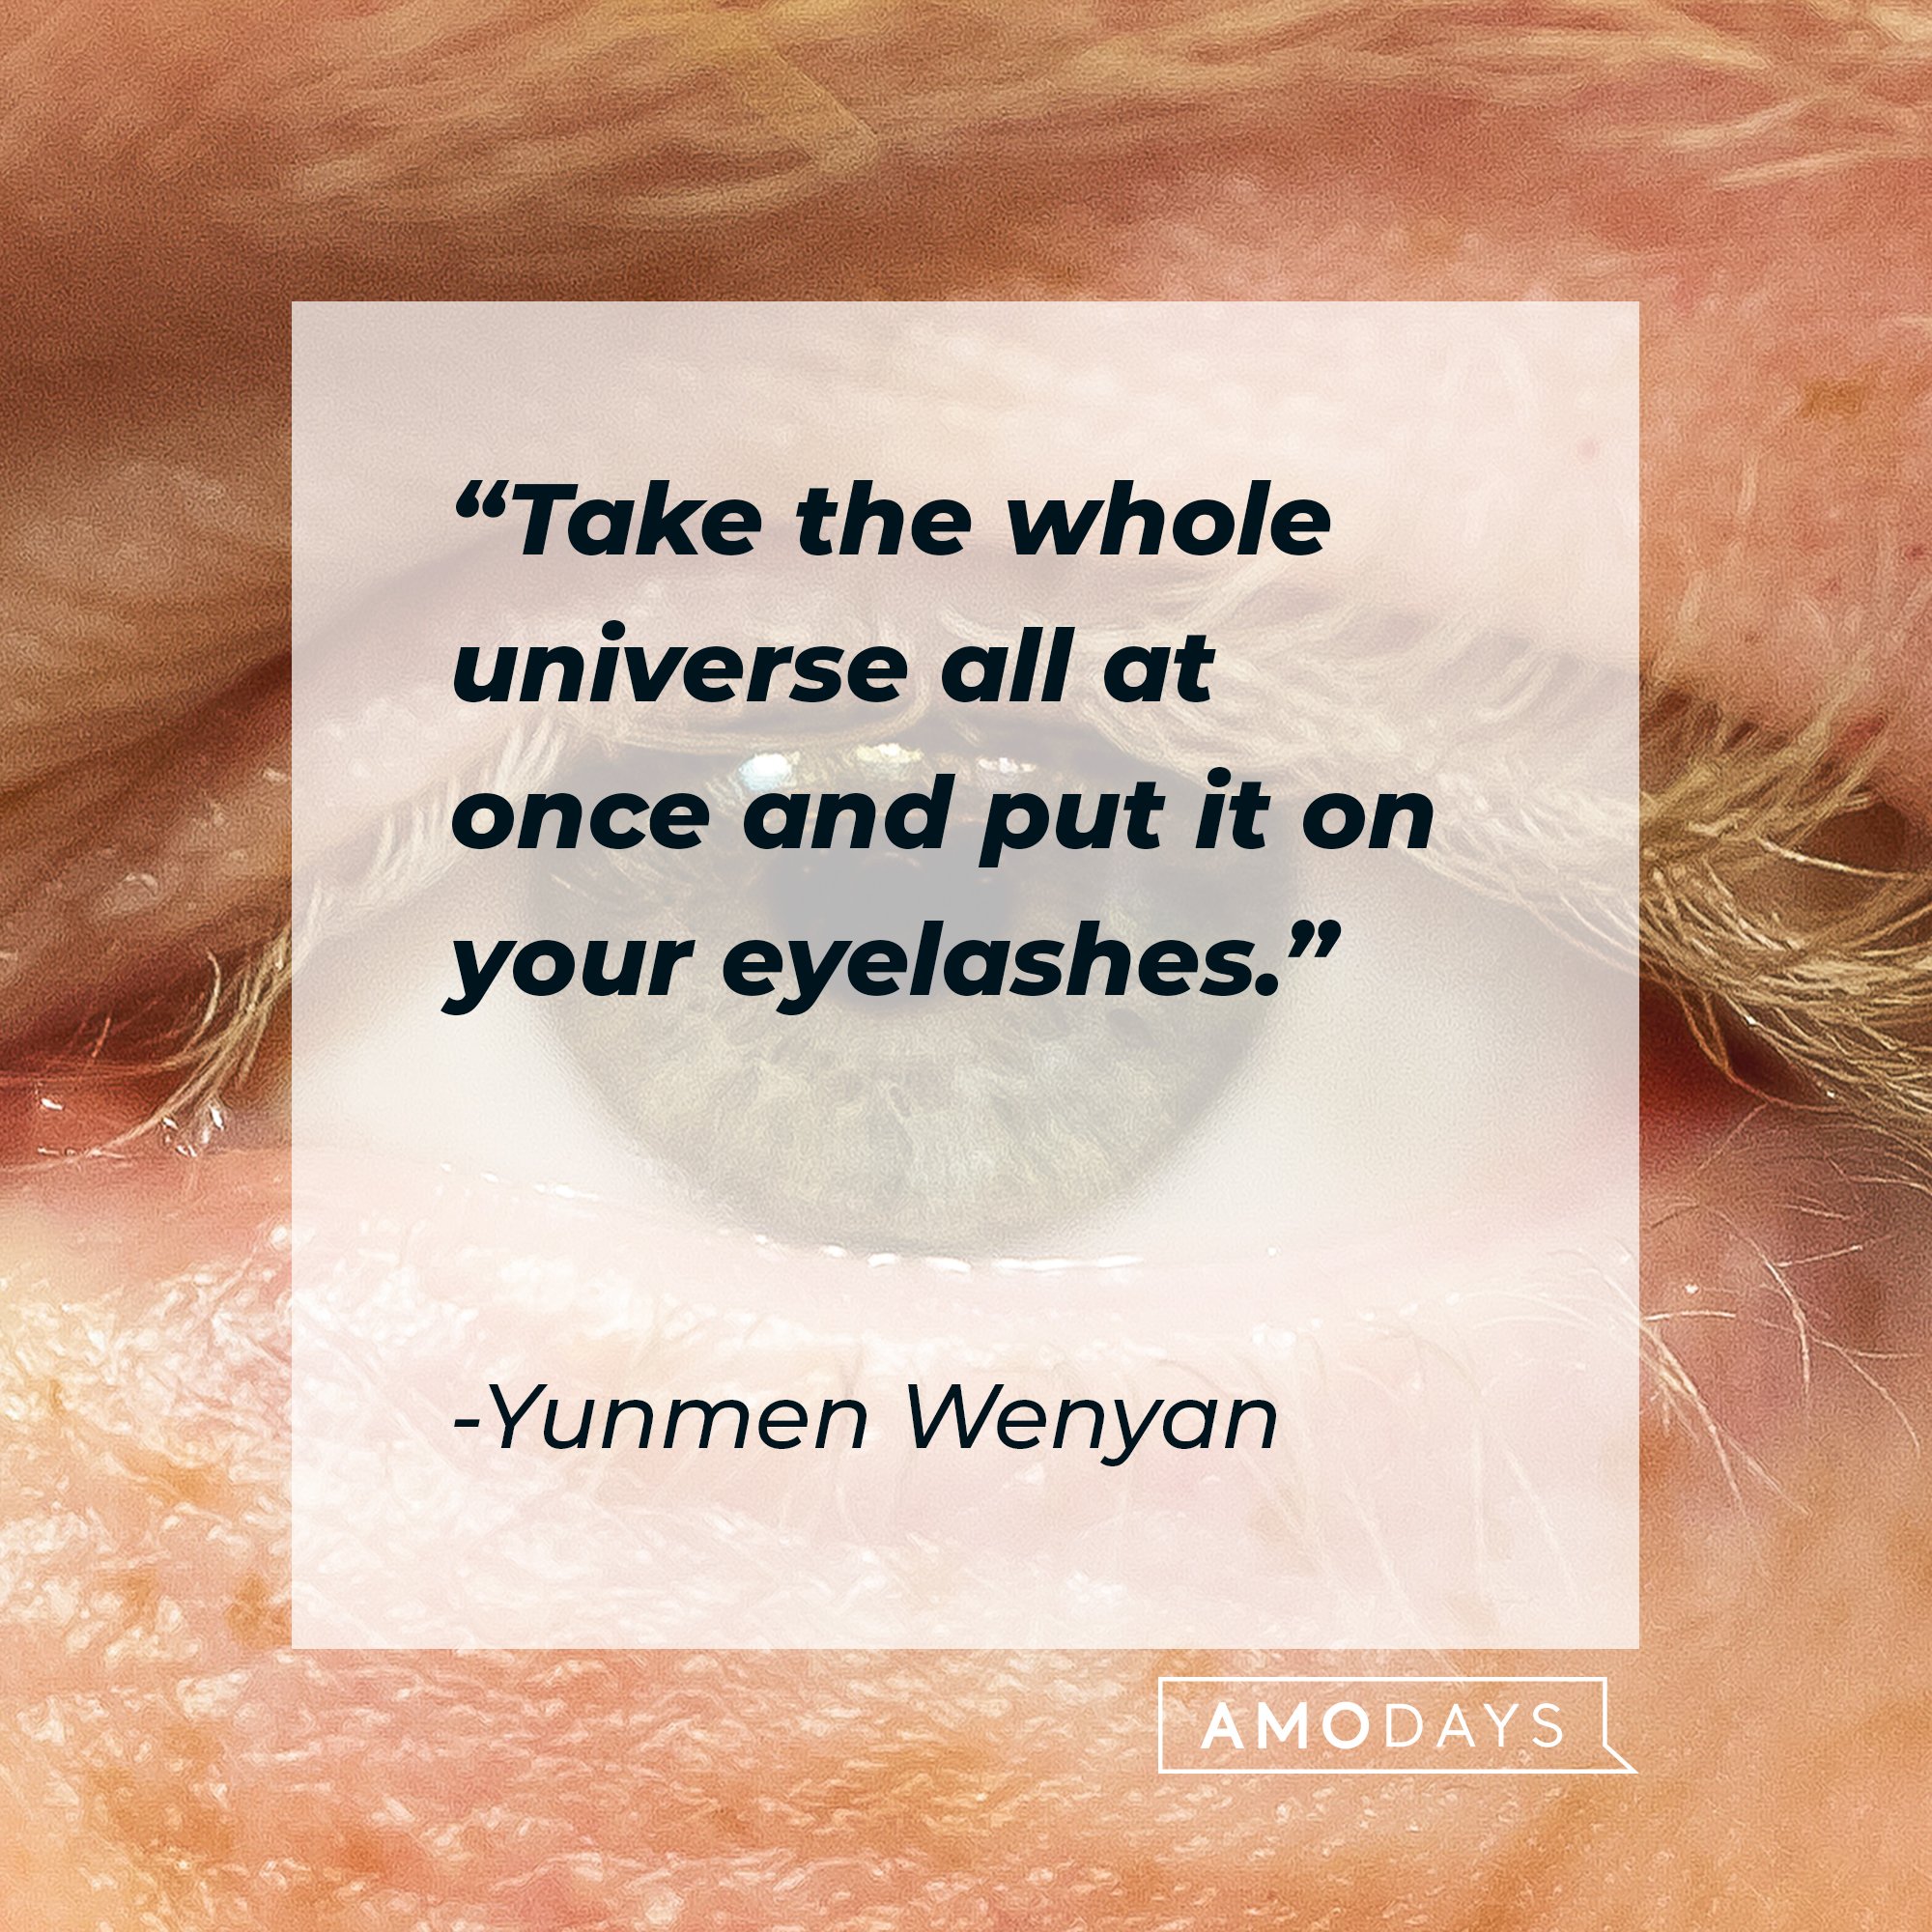 Yunmen Wenyan’s quote: "Take the whole universe all at once and put it on your eyelashes." |  Image: AmoDays